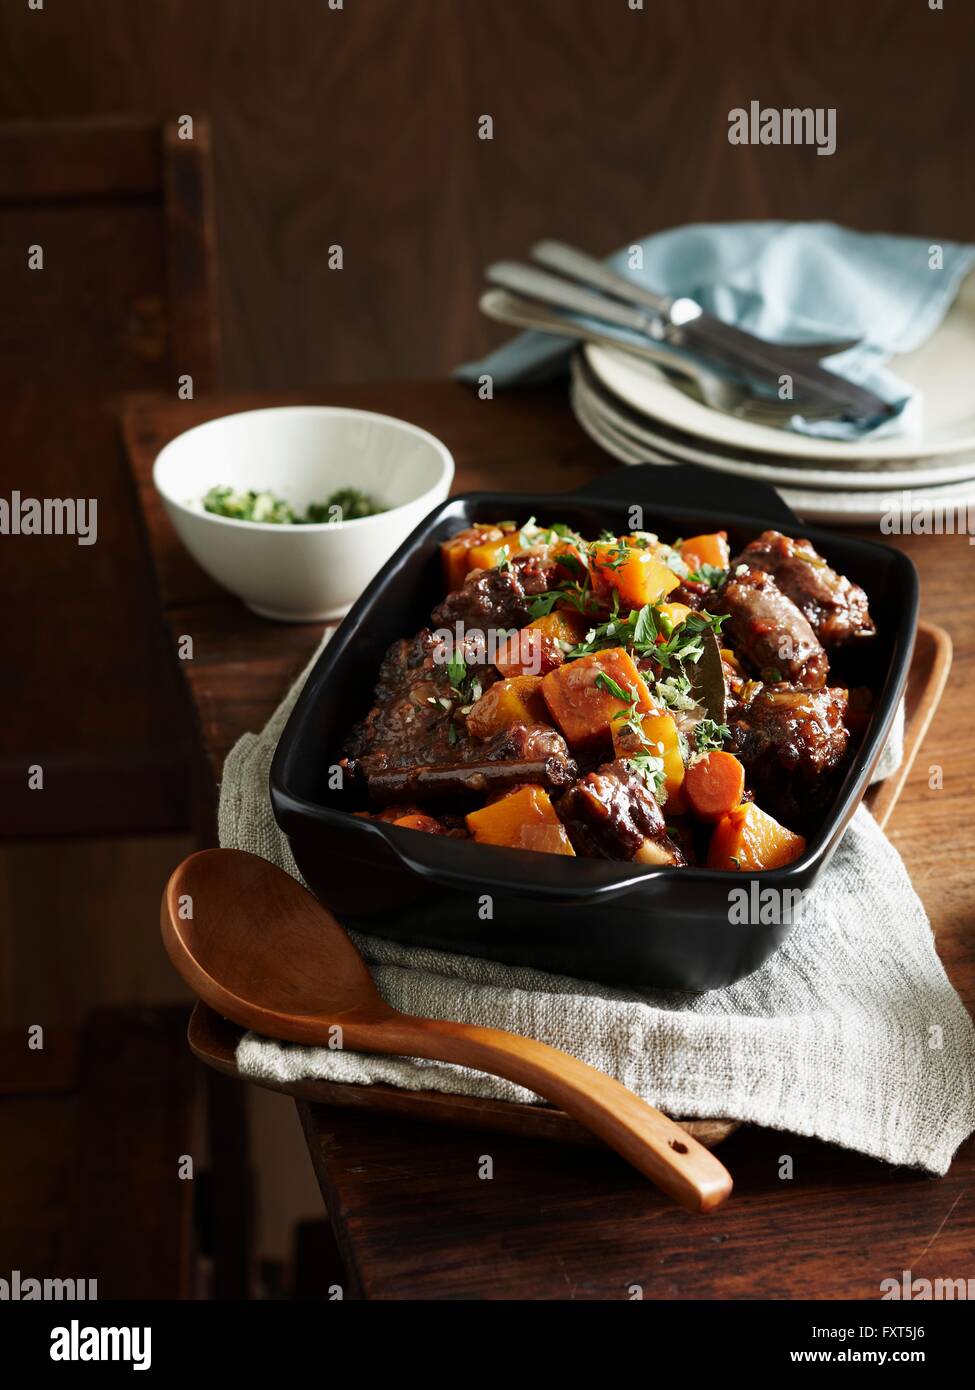 Middle eastern oxtail stew in serving dish with wooden serving spoon Stock Photo